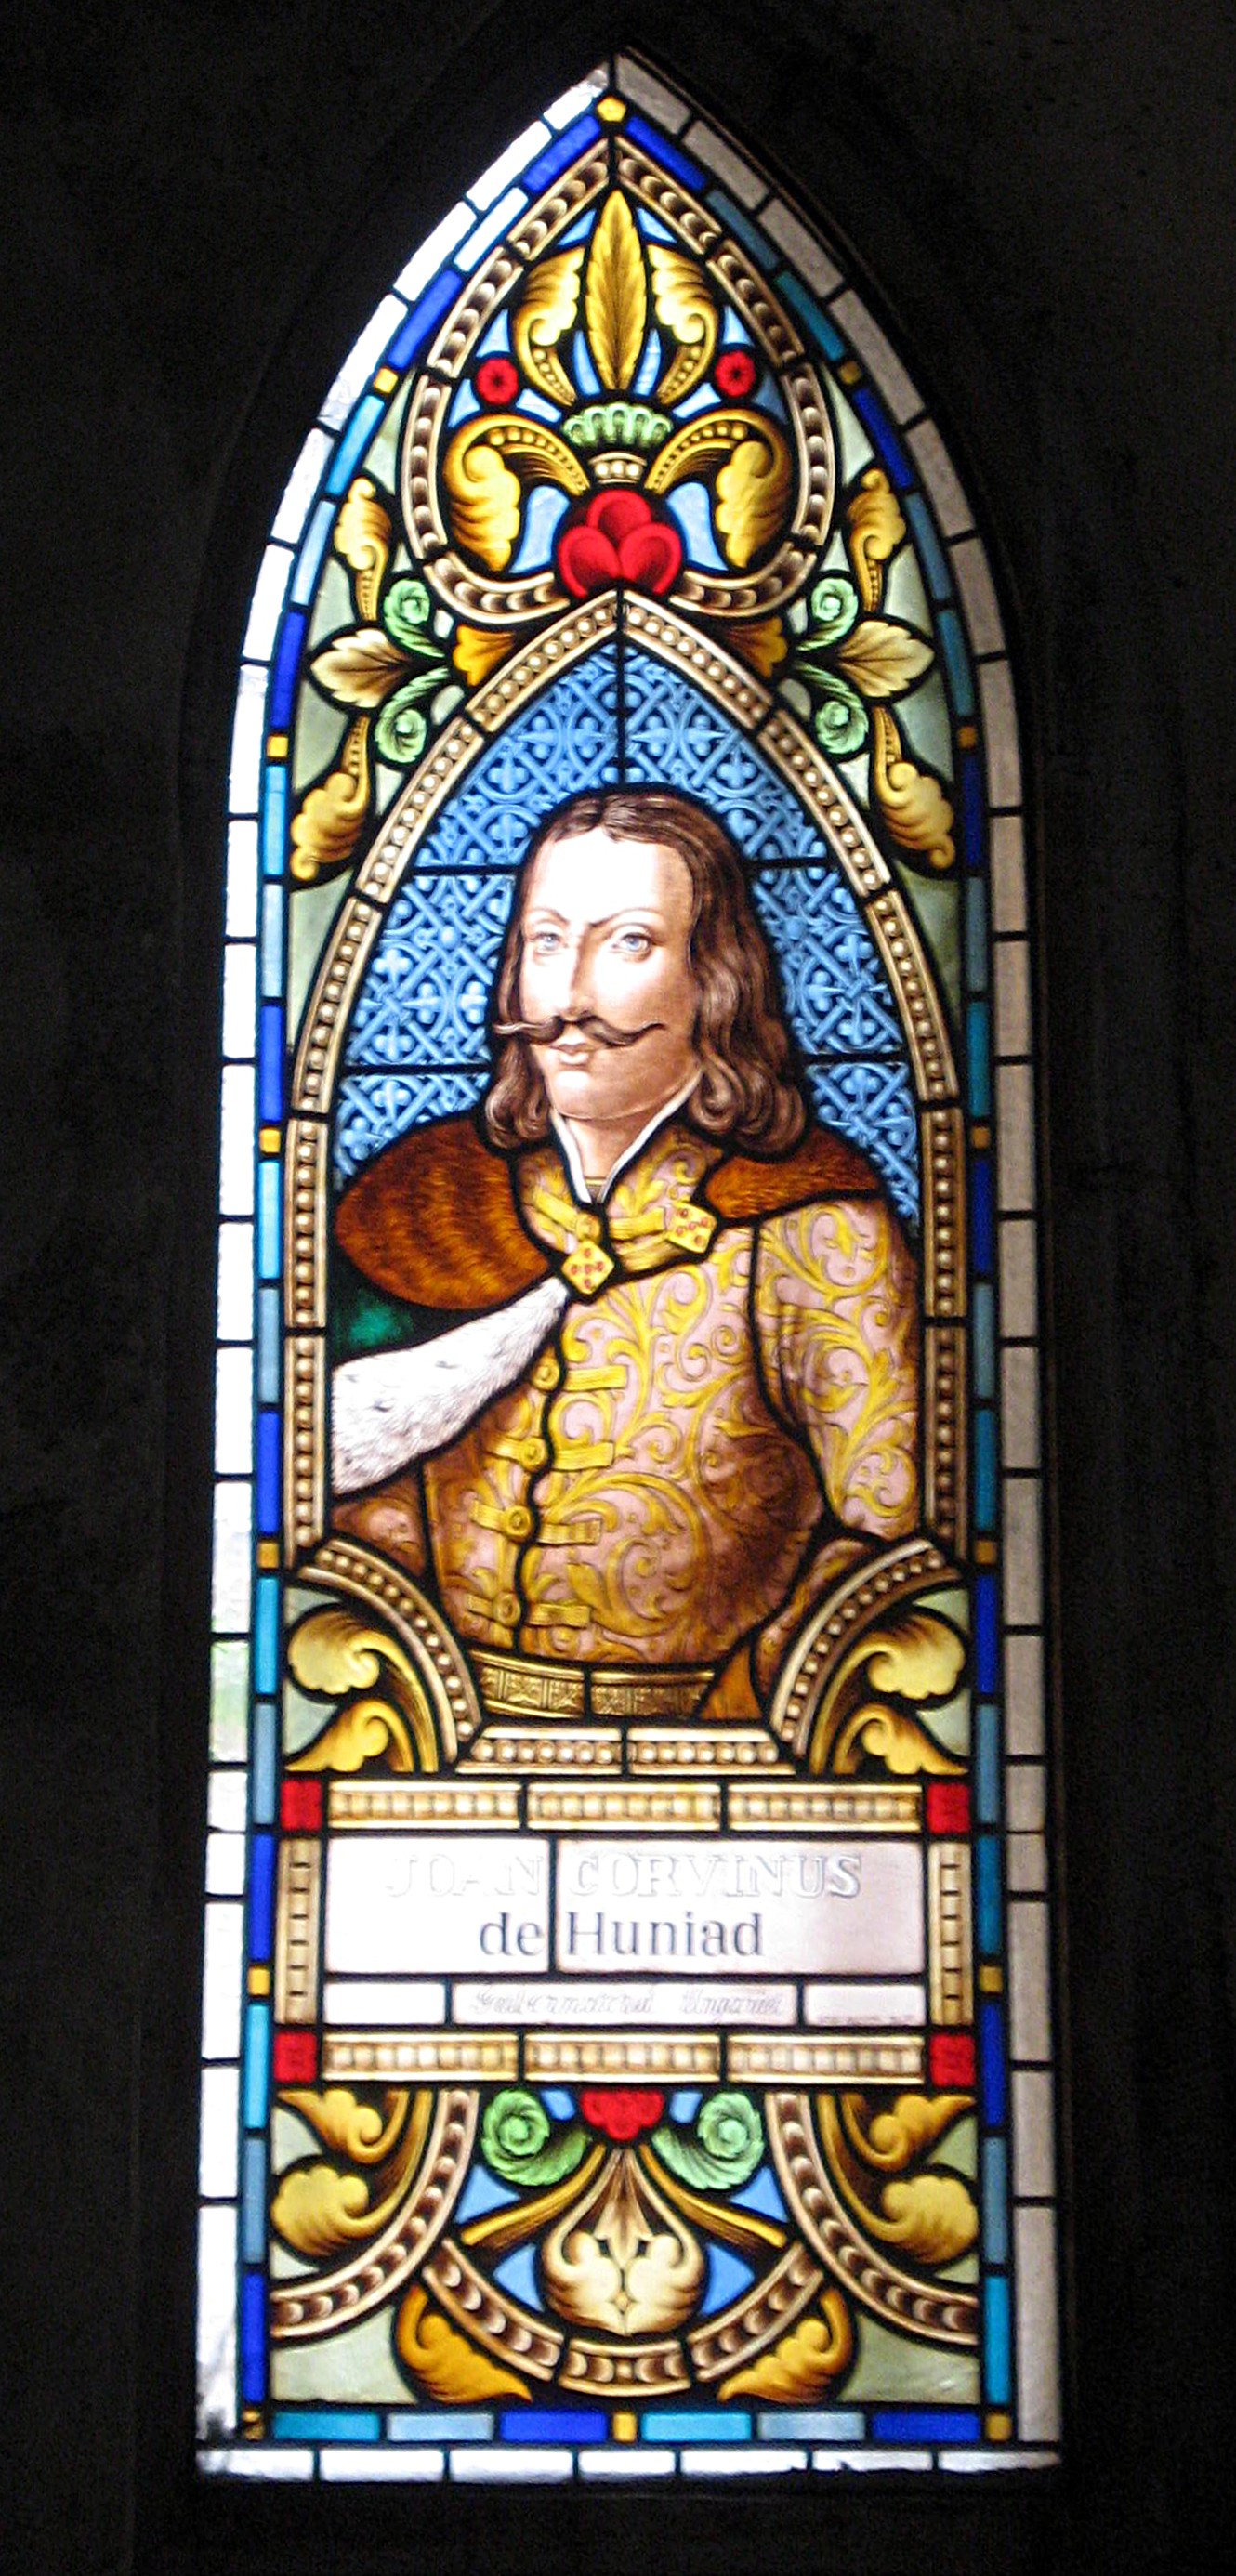 Iancu drawn in stained glass